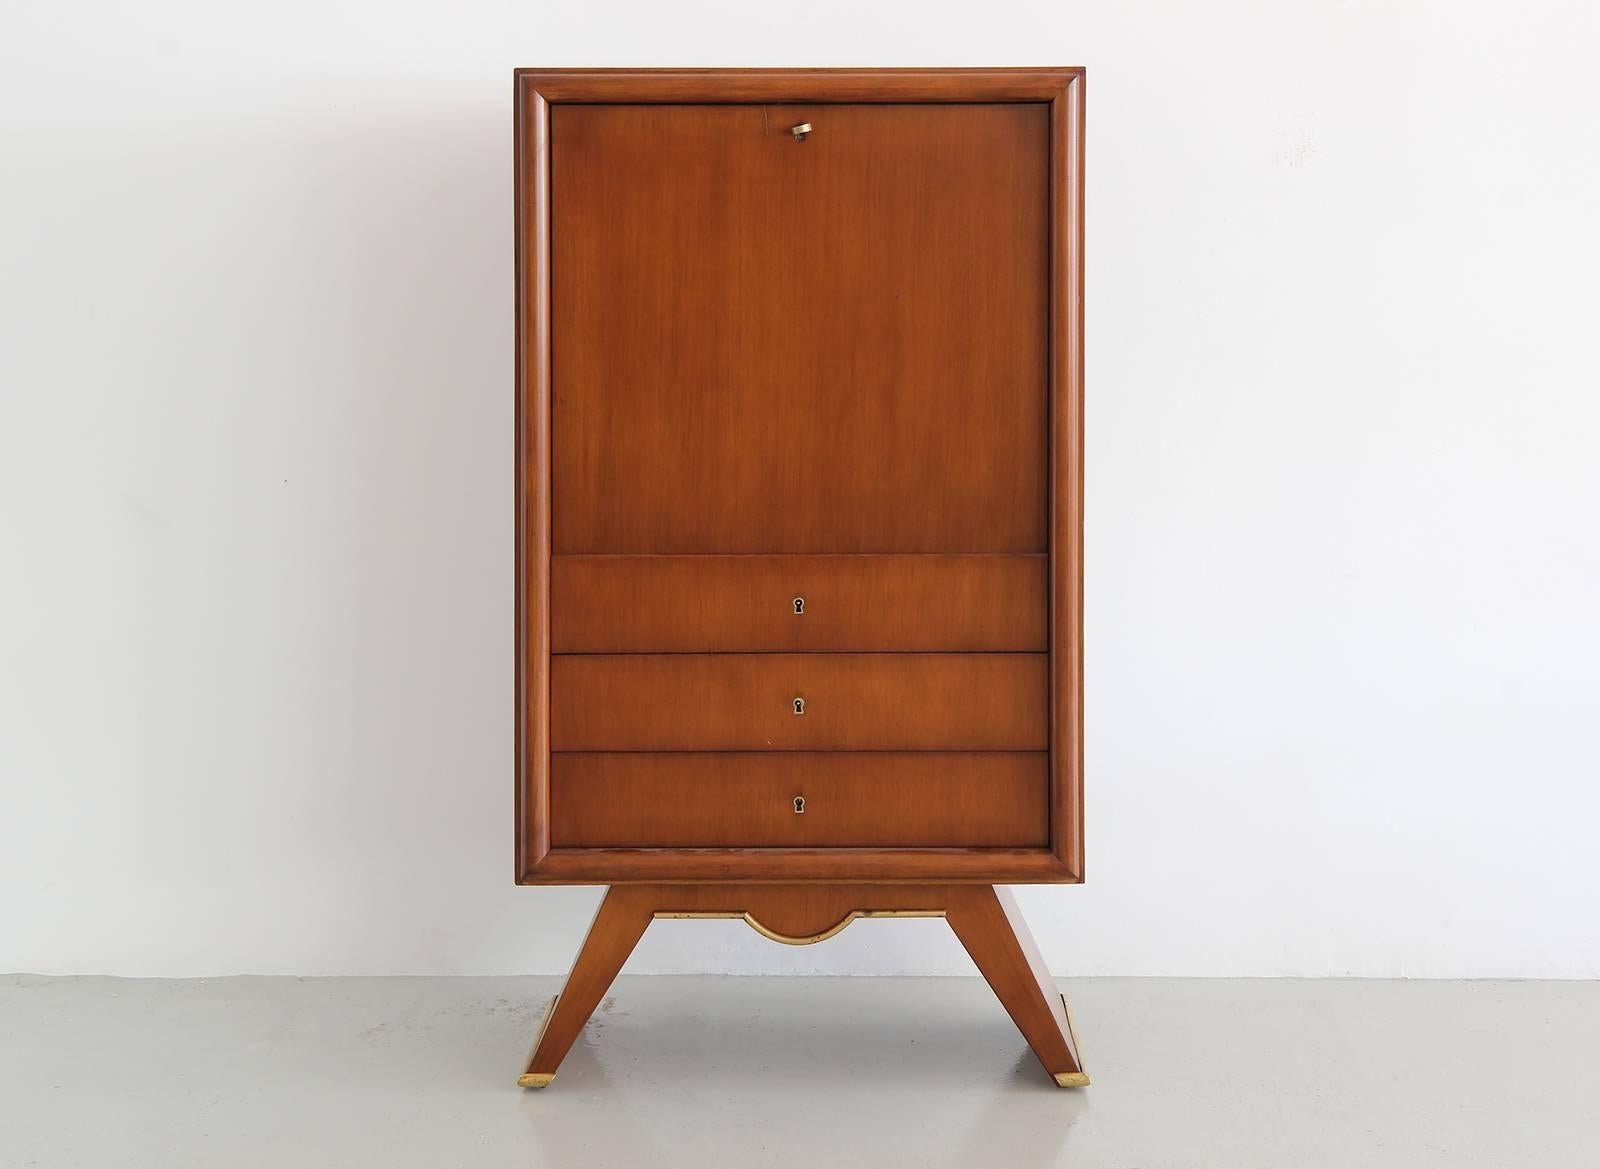 1940s Fantastic French secretary cabinet with sycamore veneer.
Drop down front with open storage and three lower drawers.
Wonderful angled lines with brass trim.
Newly refinished.